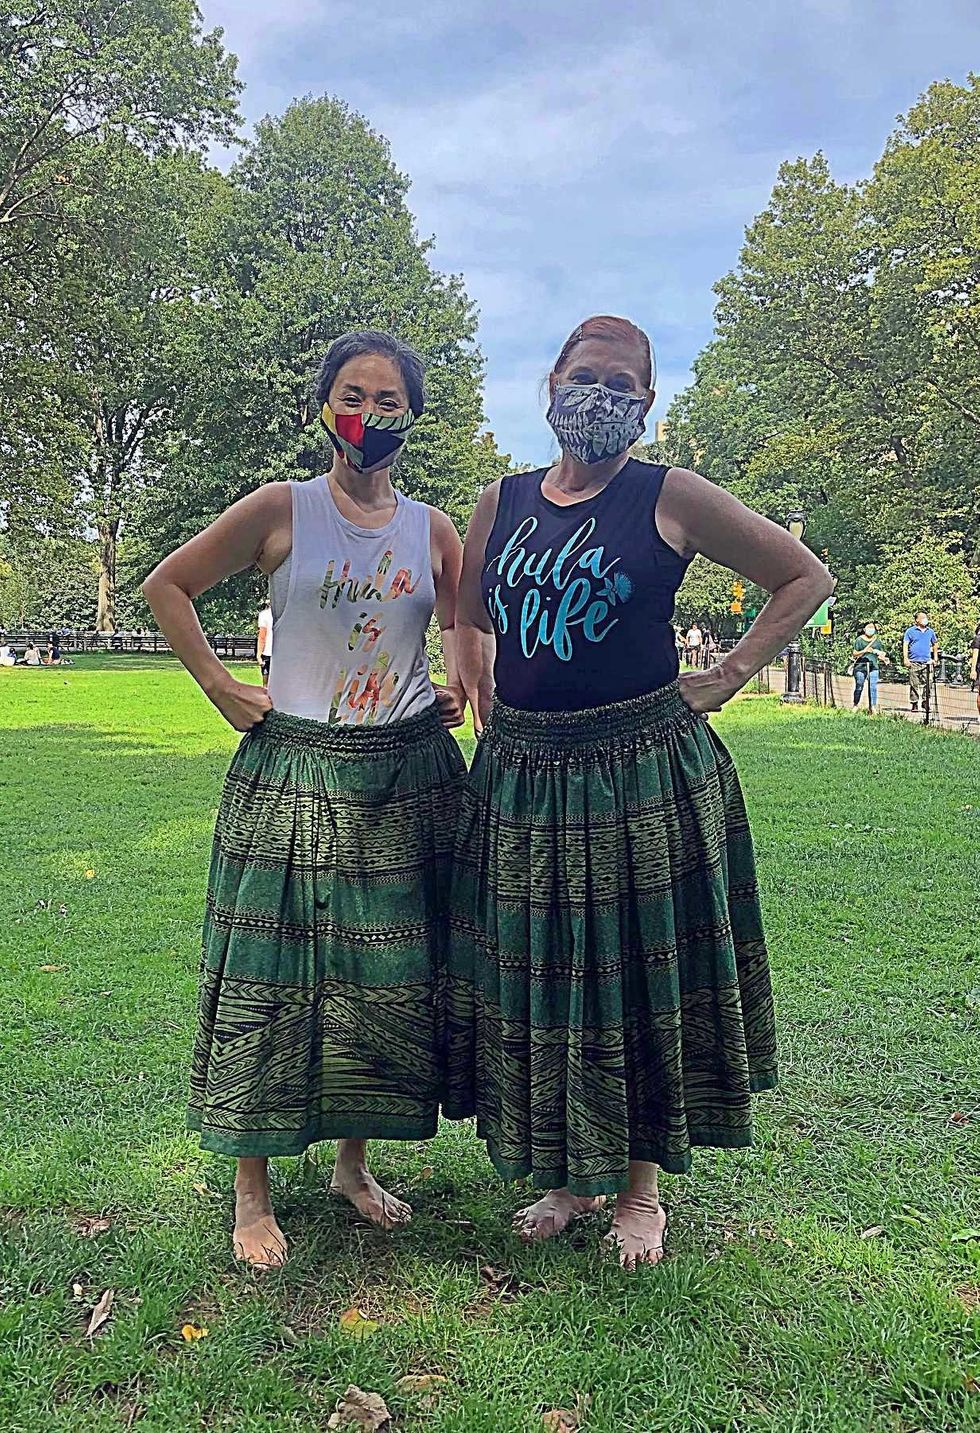 Two women in green skirts, masks, and shirts that say "hula is life," stand in a grassy area in the park